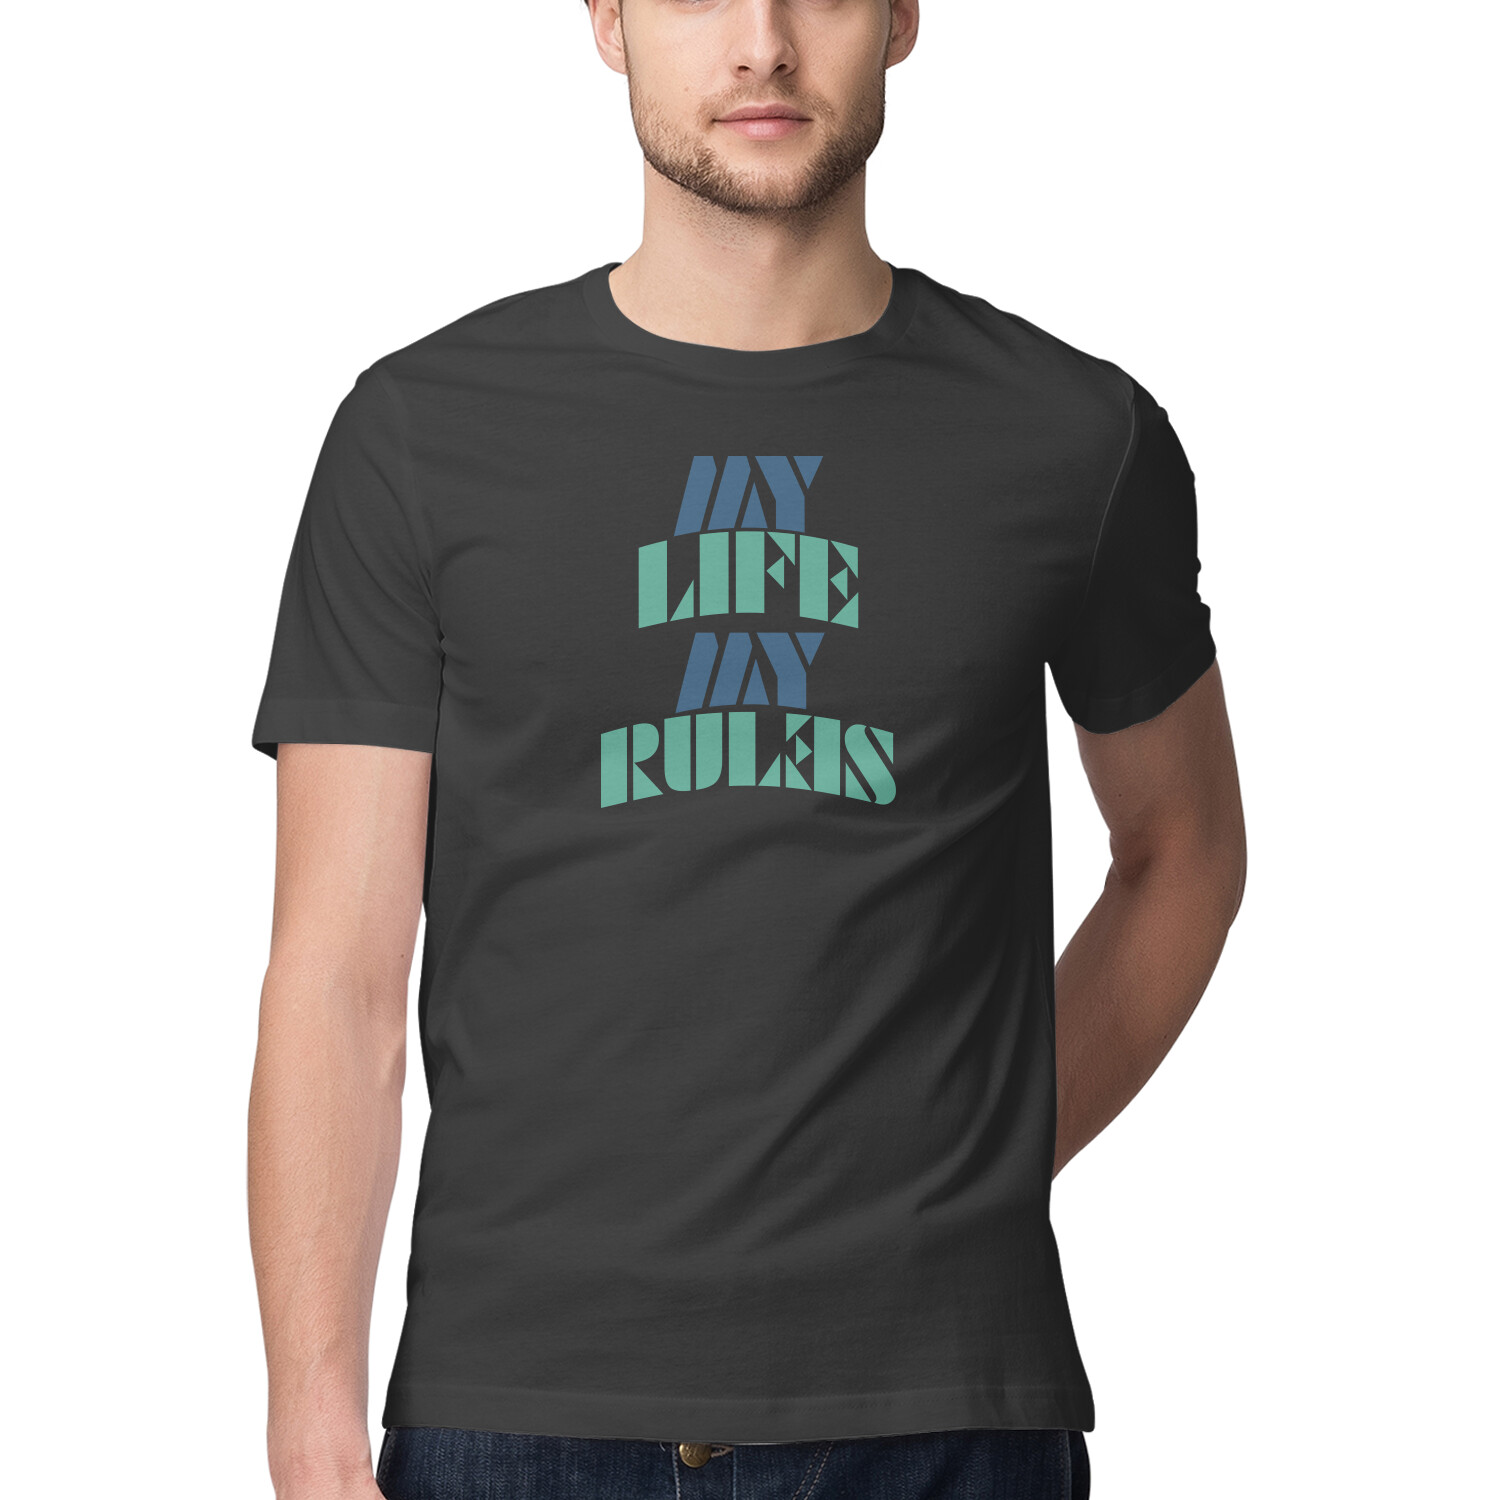 MY LIFE MY RULES, Funny T-shirt quotes and sayings